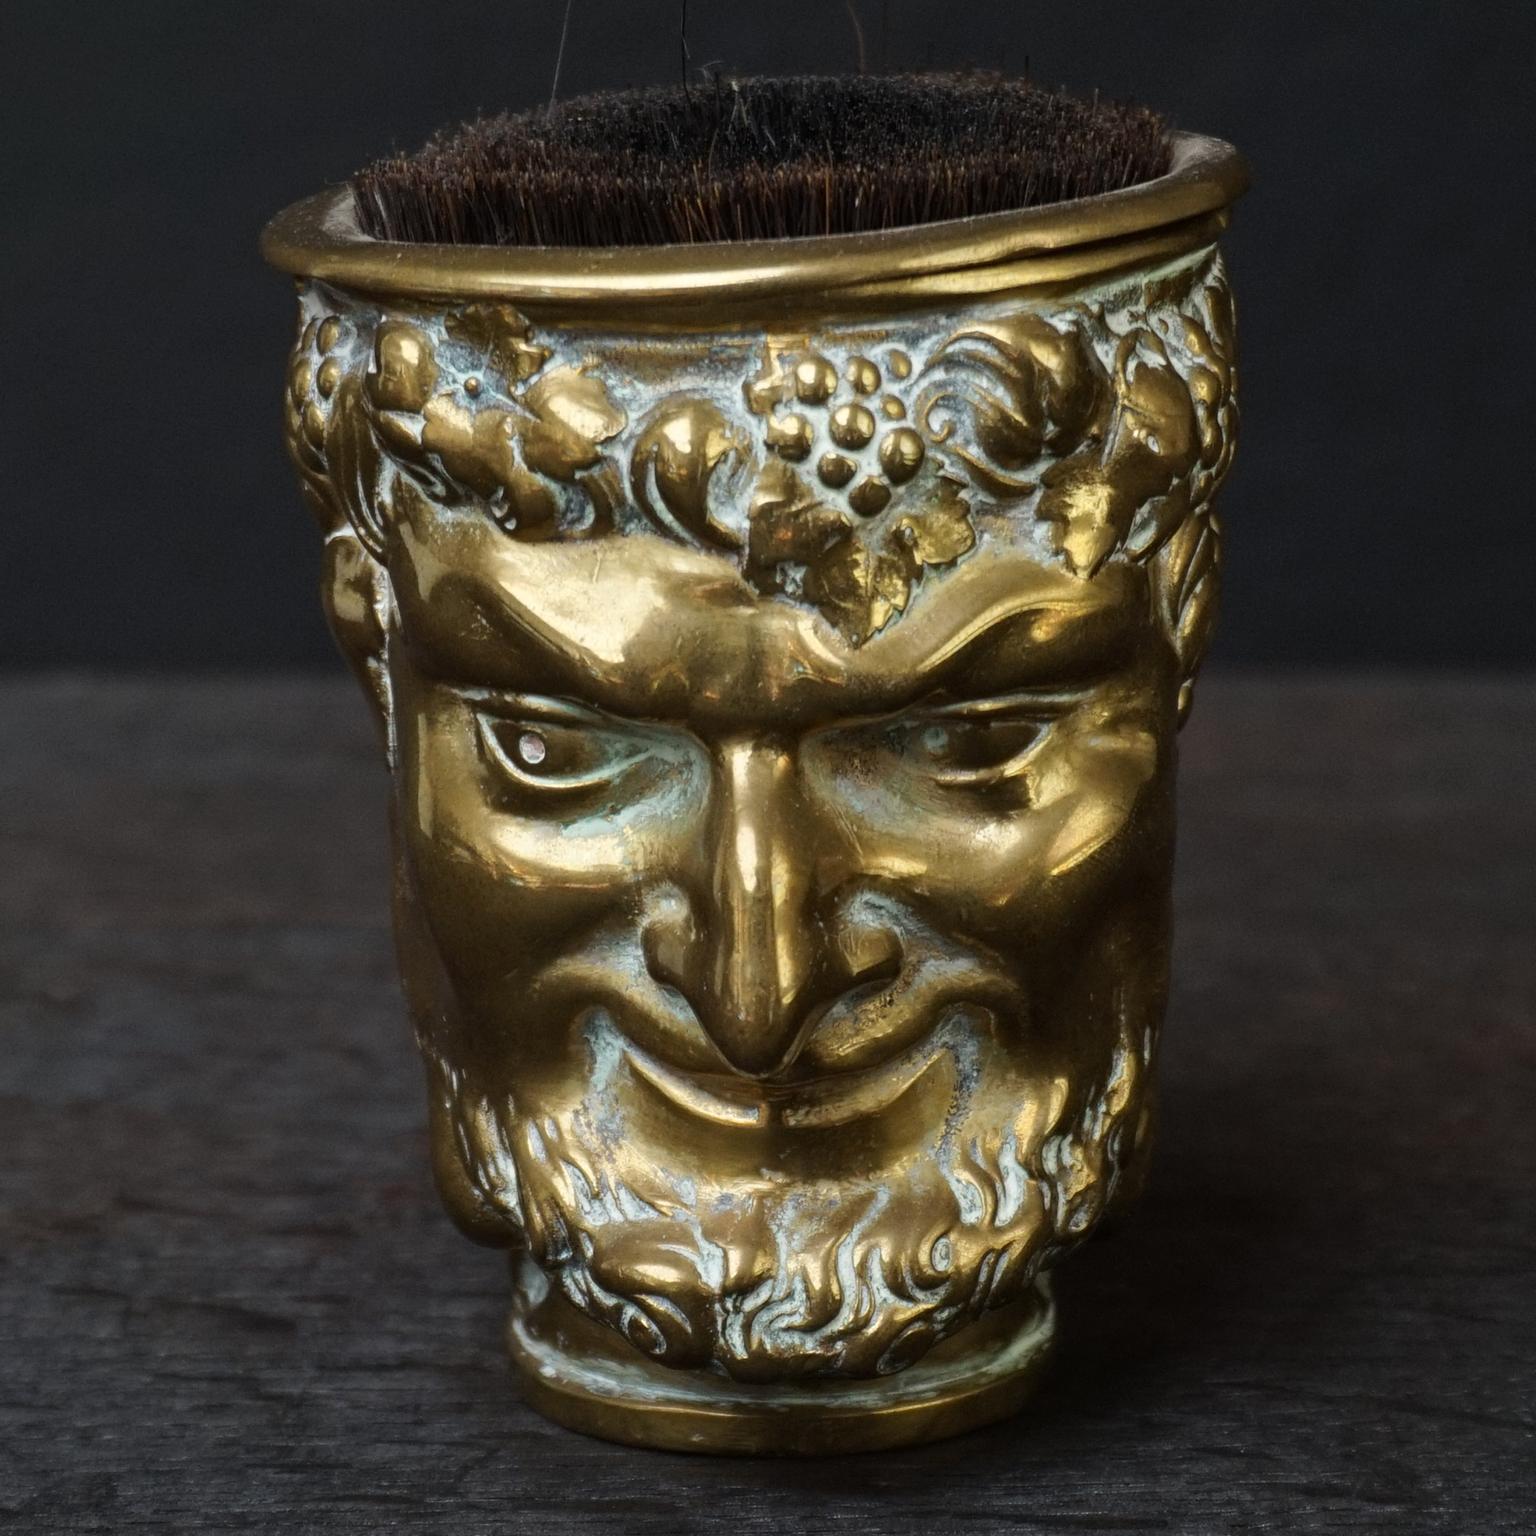 Antique heavy cast brass satyr with grapes and grapevines in his hair.
With this grape and leafage it easily could be Bacchus and his pointy ears make him also a pan kind of figure.

This cup is not as big as the drinking cups you see with the